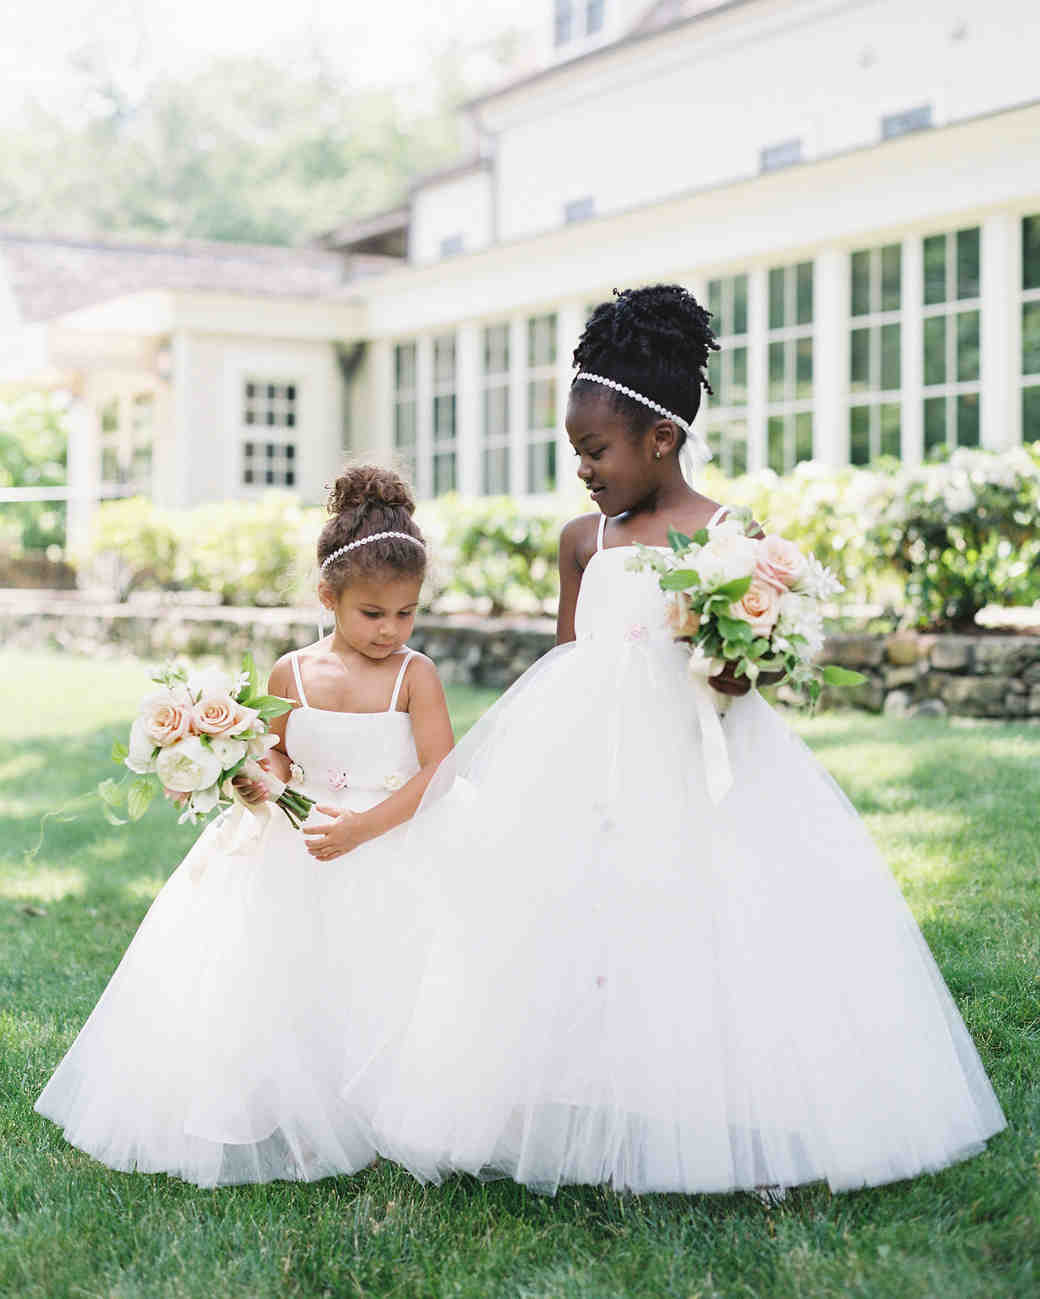 Wedding Flower Girl Hairstyles
 Adorable Hairstyle Ideas for Your Flower Girls